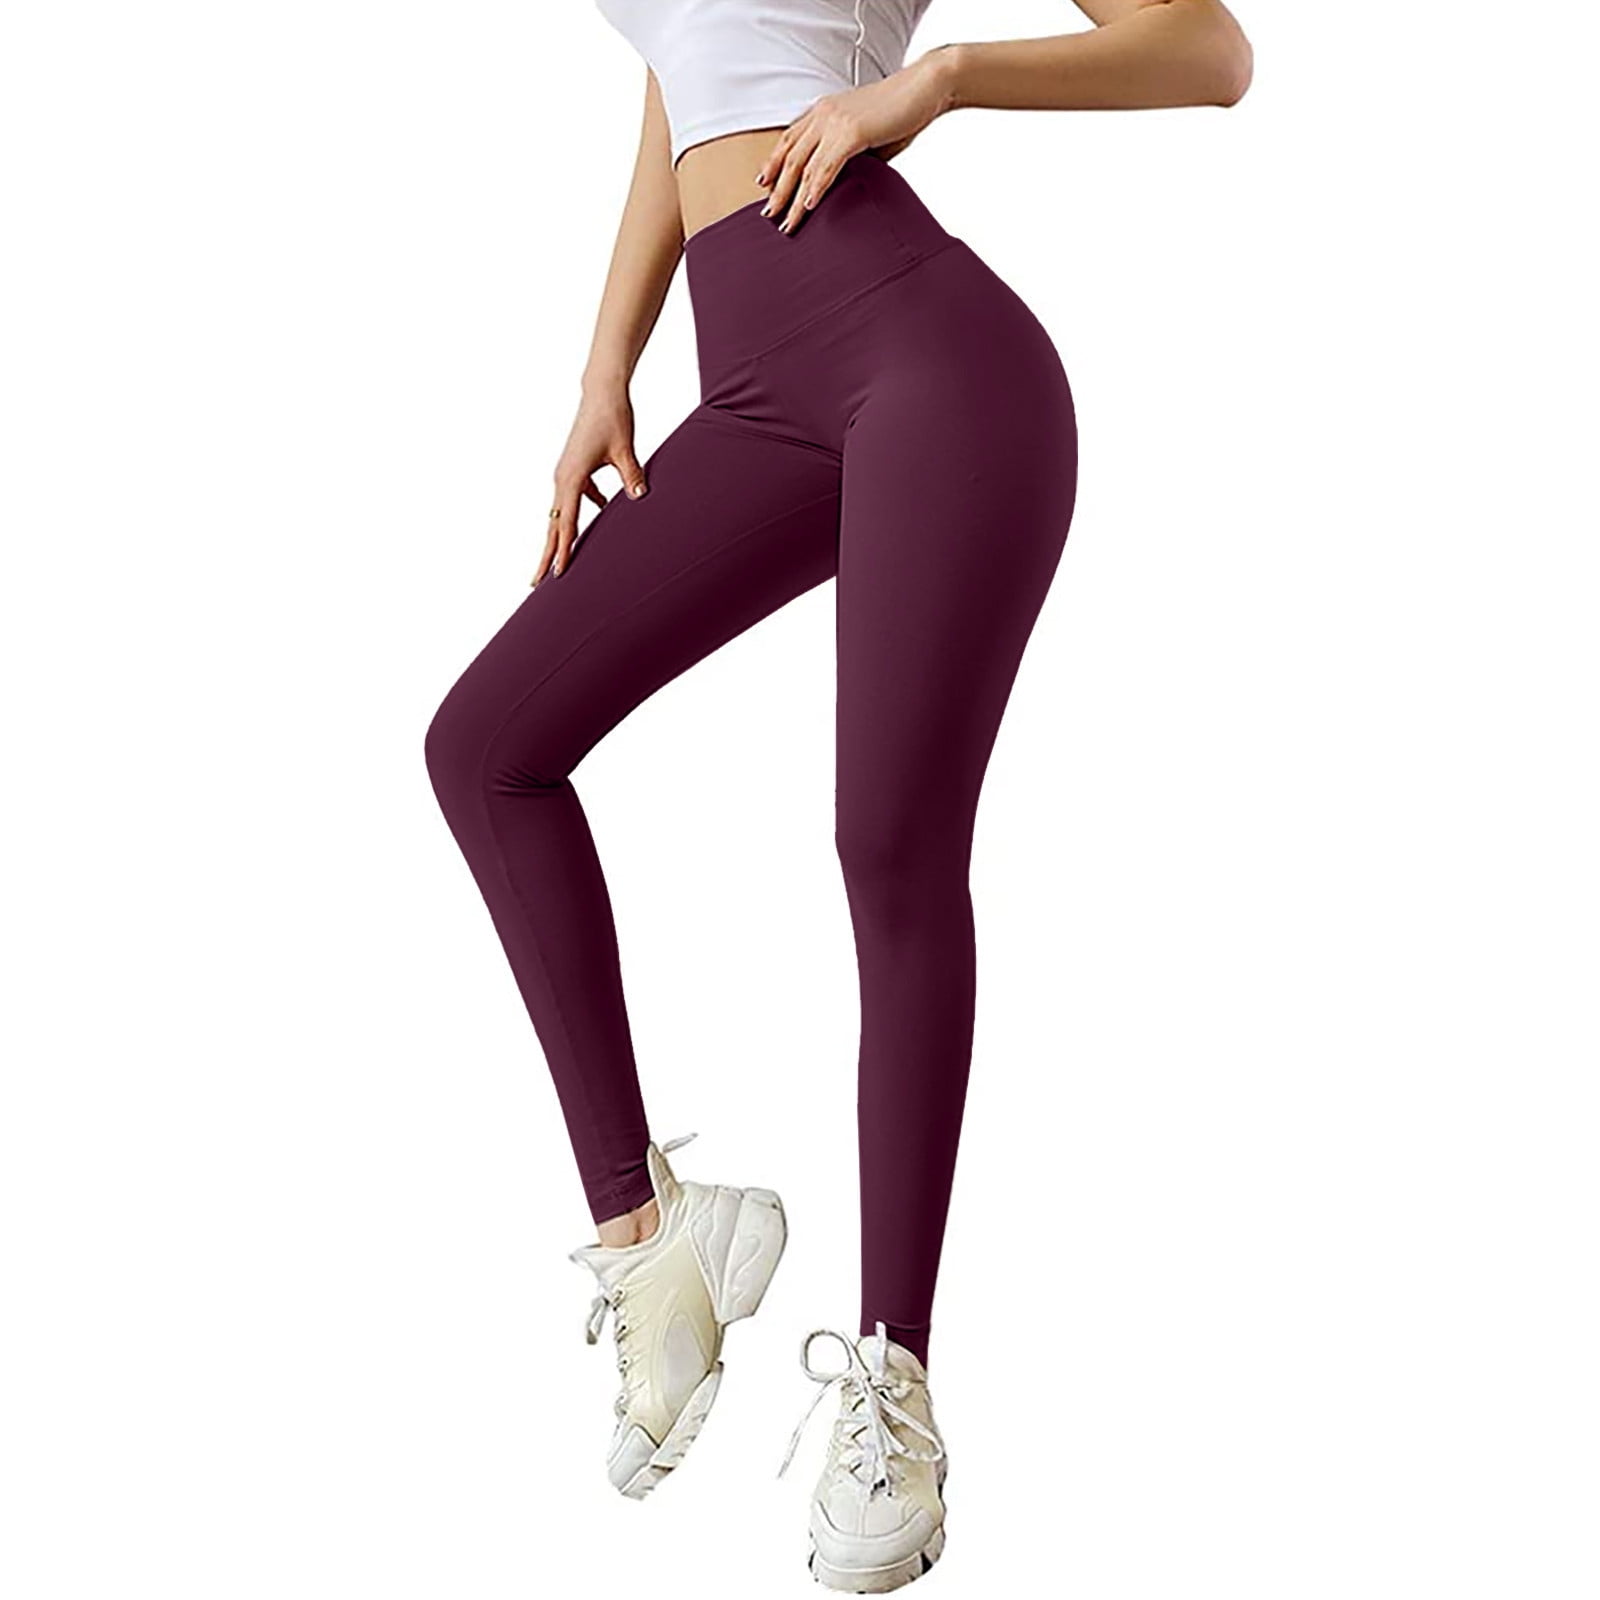 BLVB Workout Leggings for Women Bowtie High Waist Yoga Pants Stretch  Fitness Athletic Compression Tights